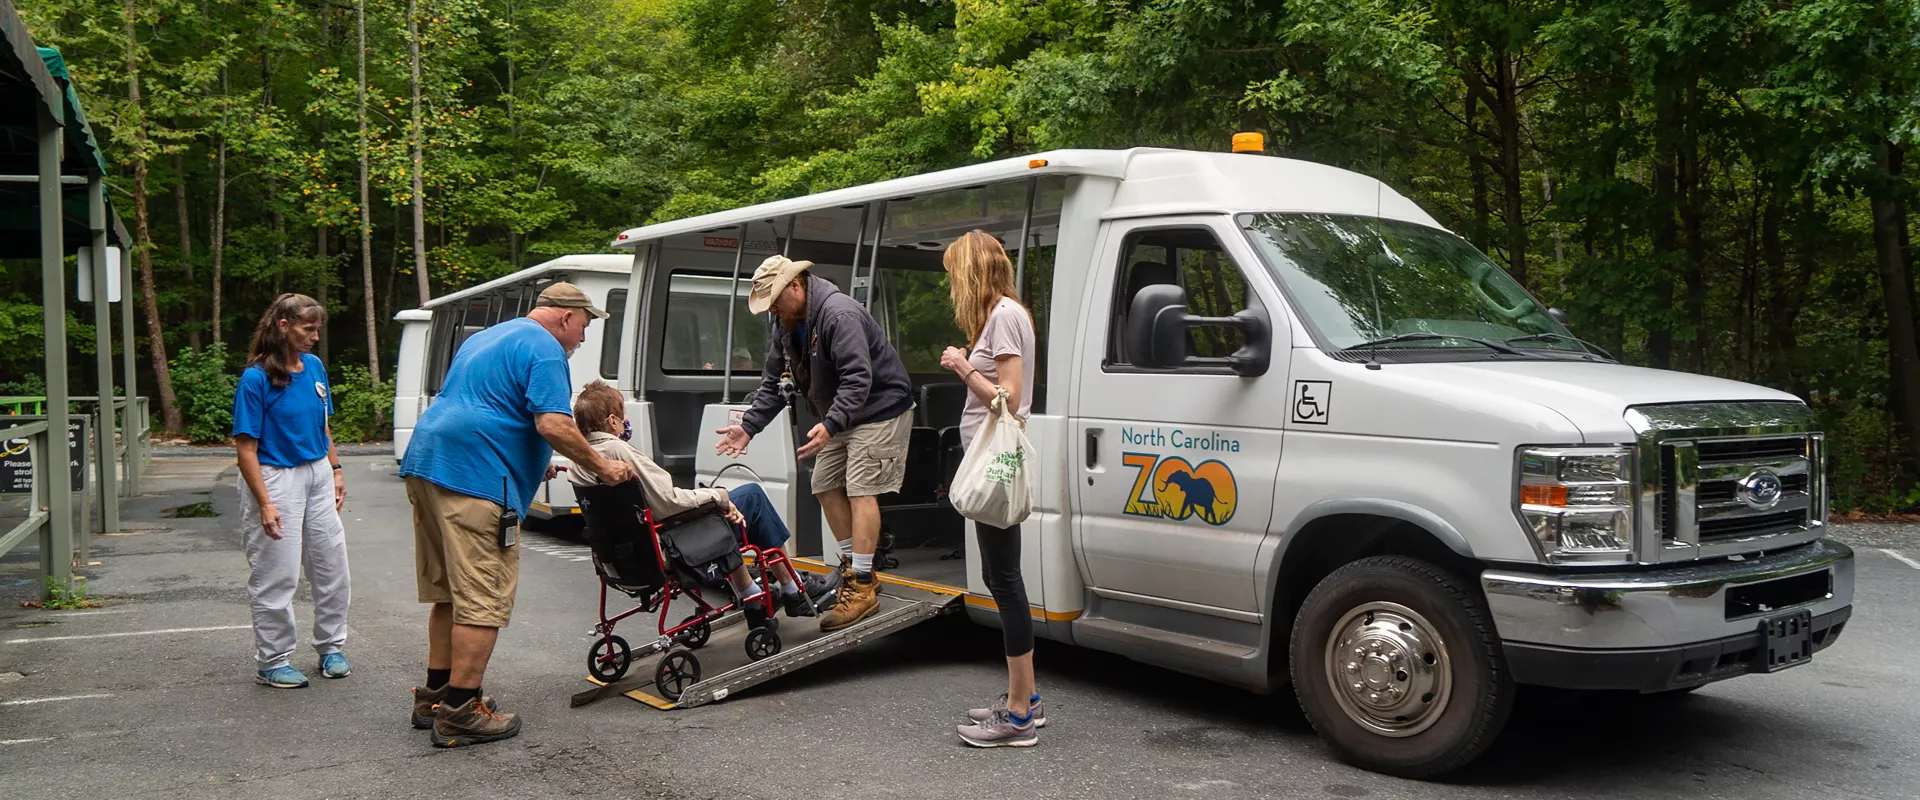 Accessibility at the Zoo